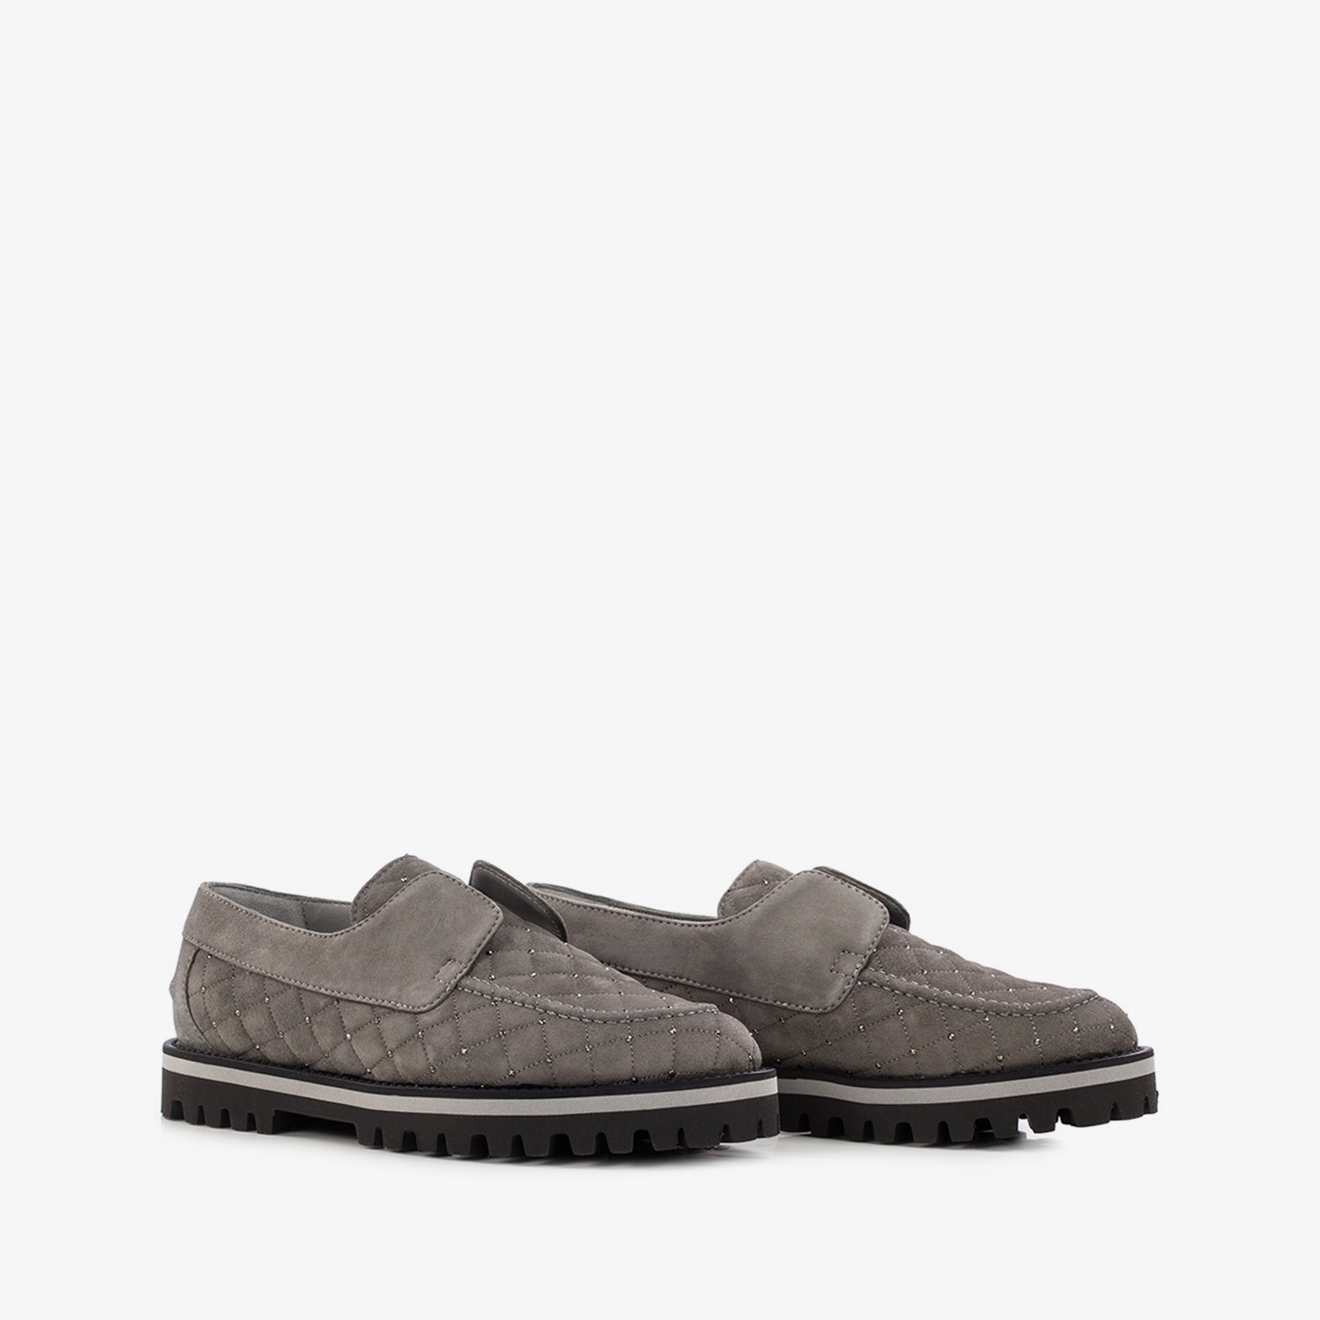 YACHT LOAFER - Le Silla official outlet